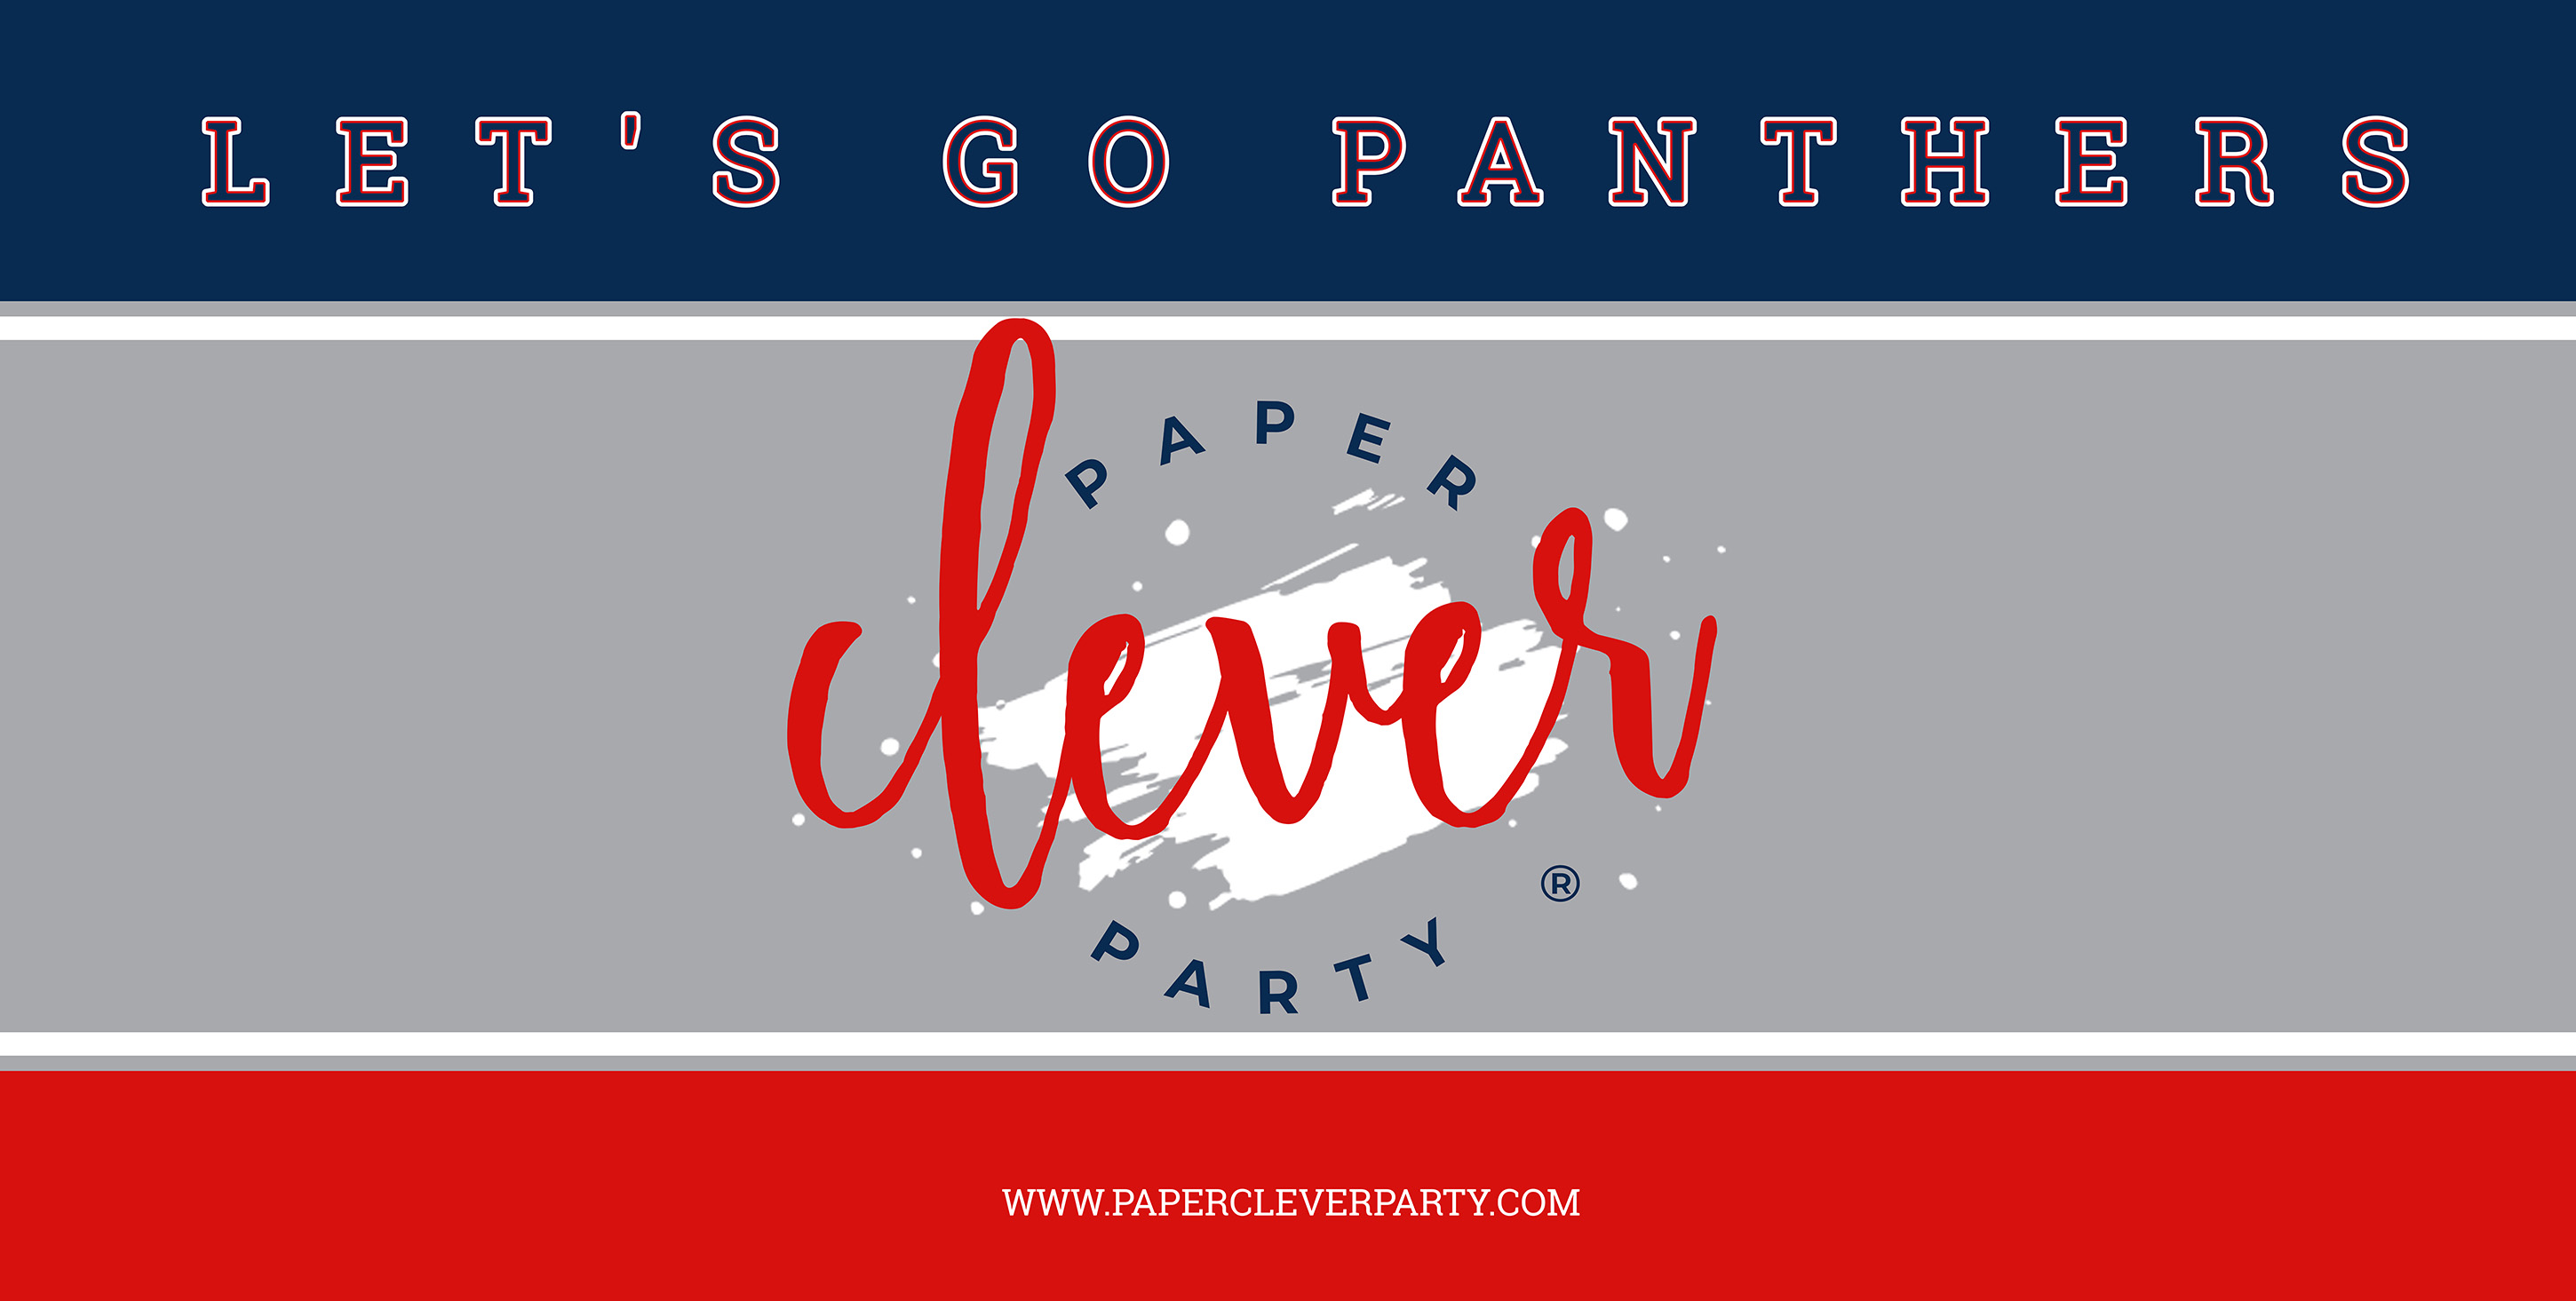 Paper Clever Party!